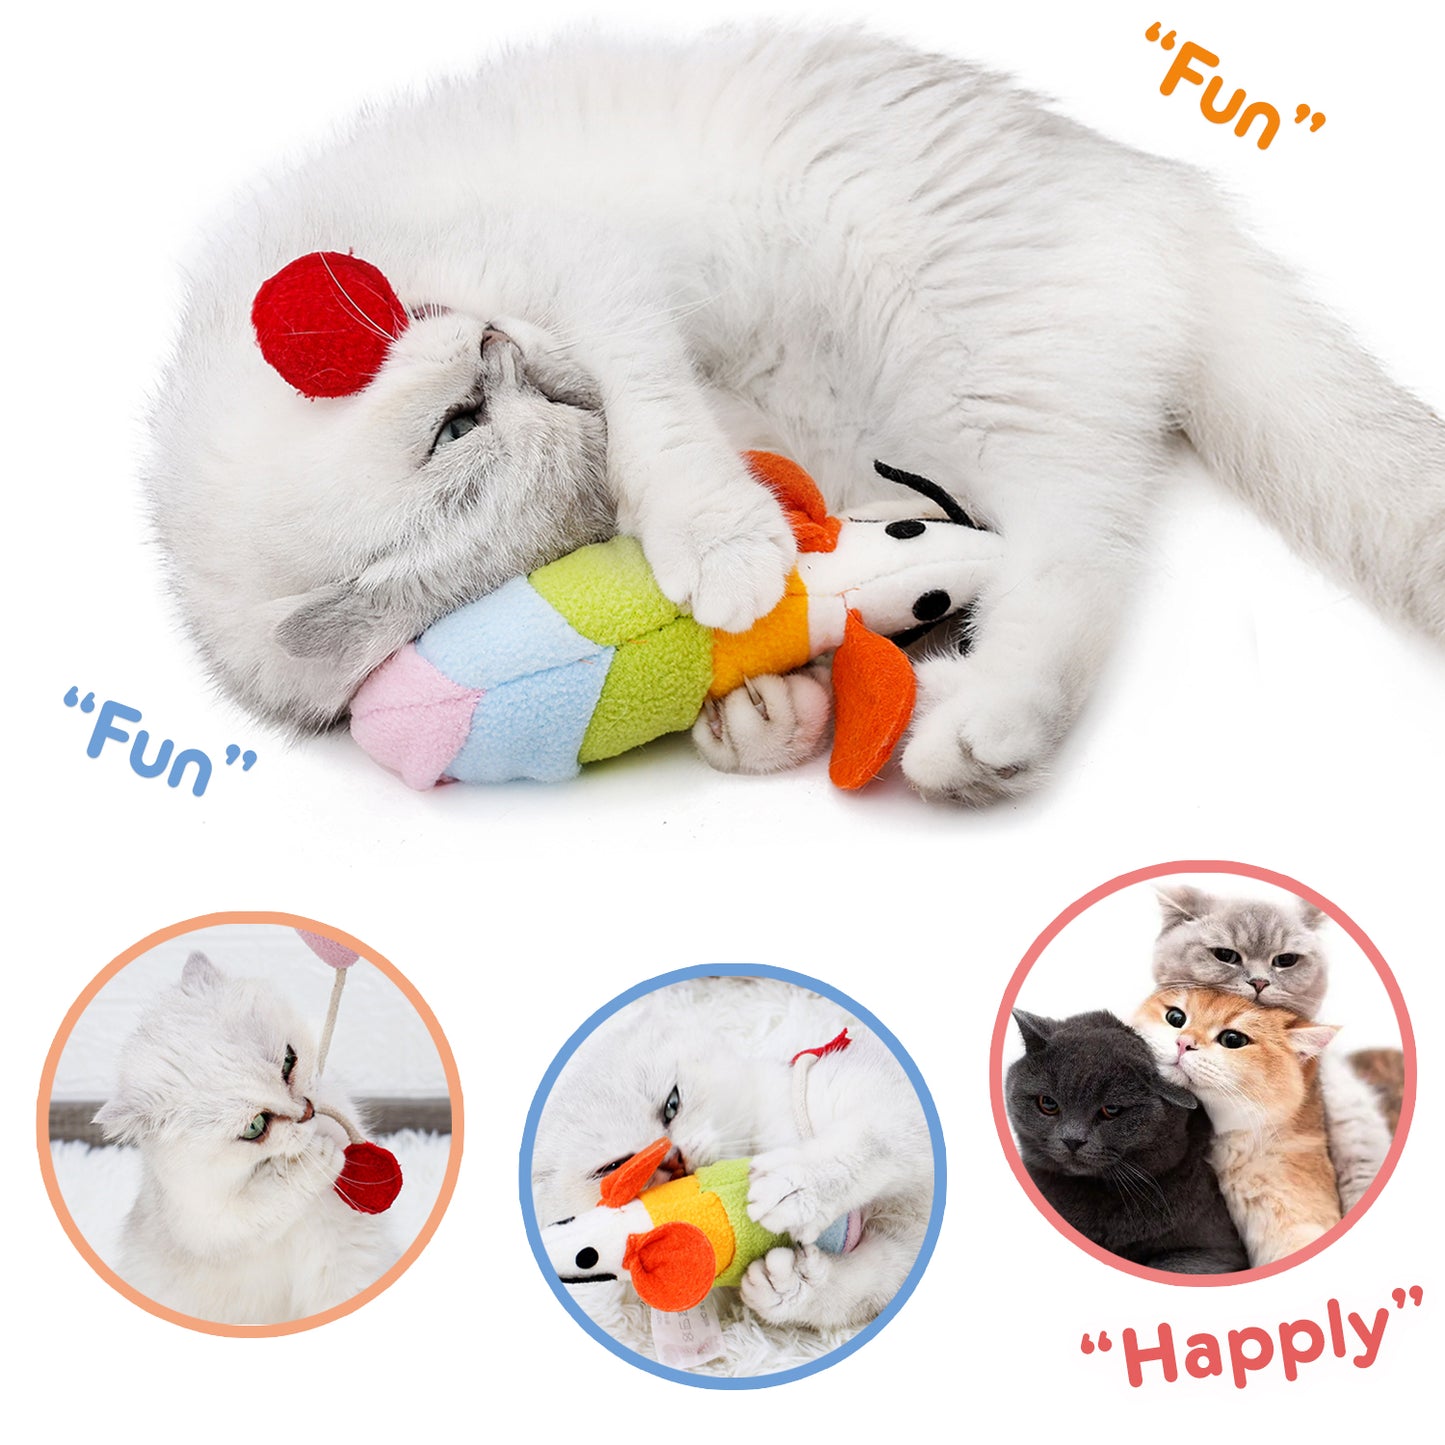 Fastsun Furry Mice Cat Toys, Rattling Catnip Toys Mice, 7” Colored Catnip Toy with Sound, Catnip Prefilled Cat Mice Toy for Indoor Cats Kitten Interactive Play Fetch